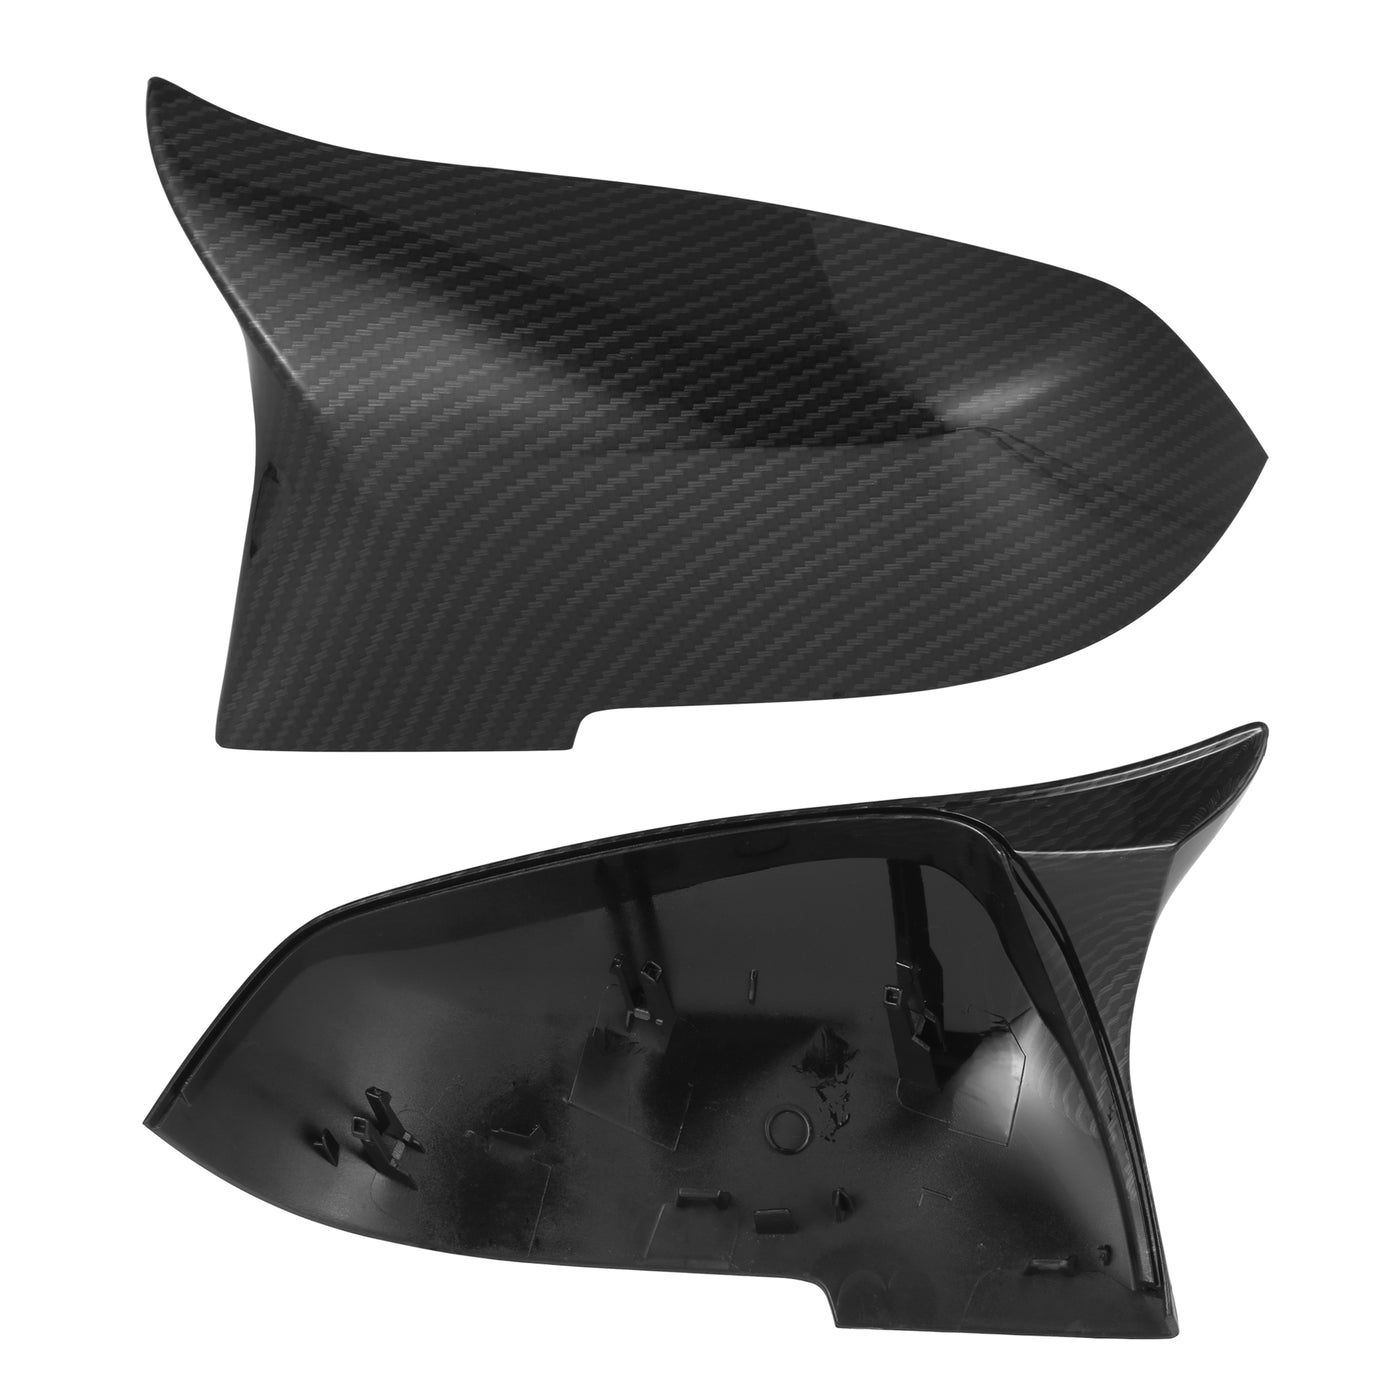 X AUTOHAUX Pair Door Rearview Mirror Cover Cap Replacement Carbon Fiber Pattern for BMW F20 F22 F23 F30 F31 F32 F33 F36 F87 M2 X1 E84